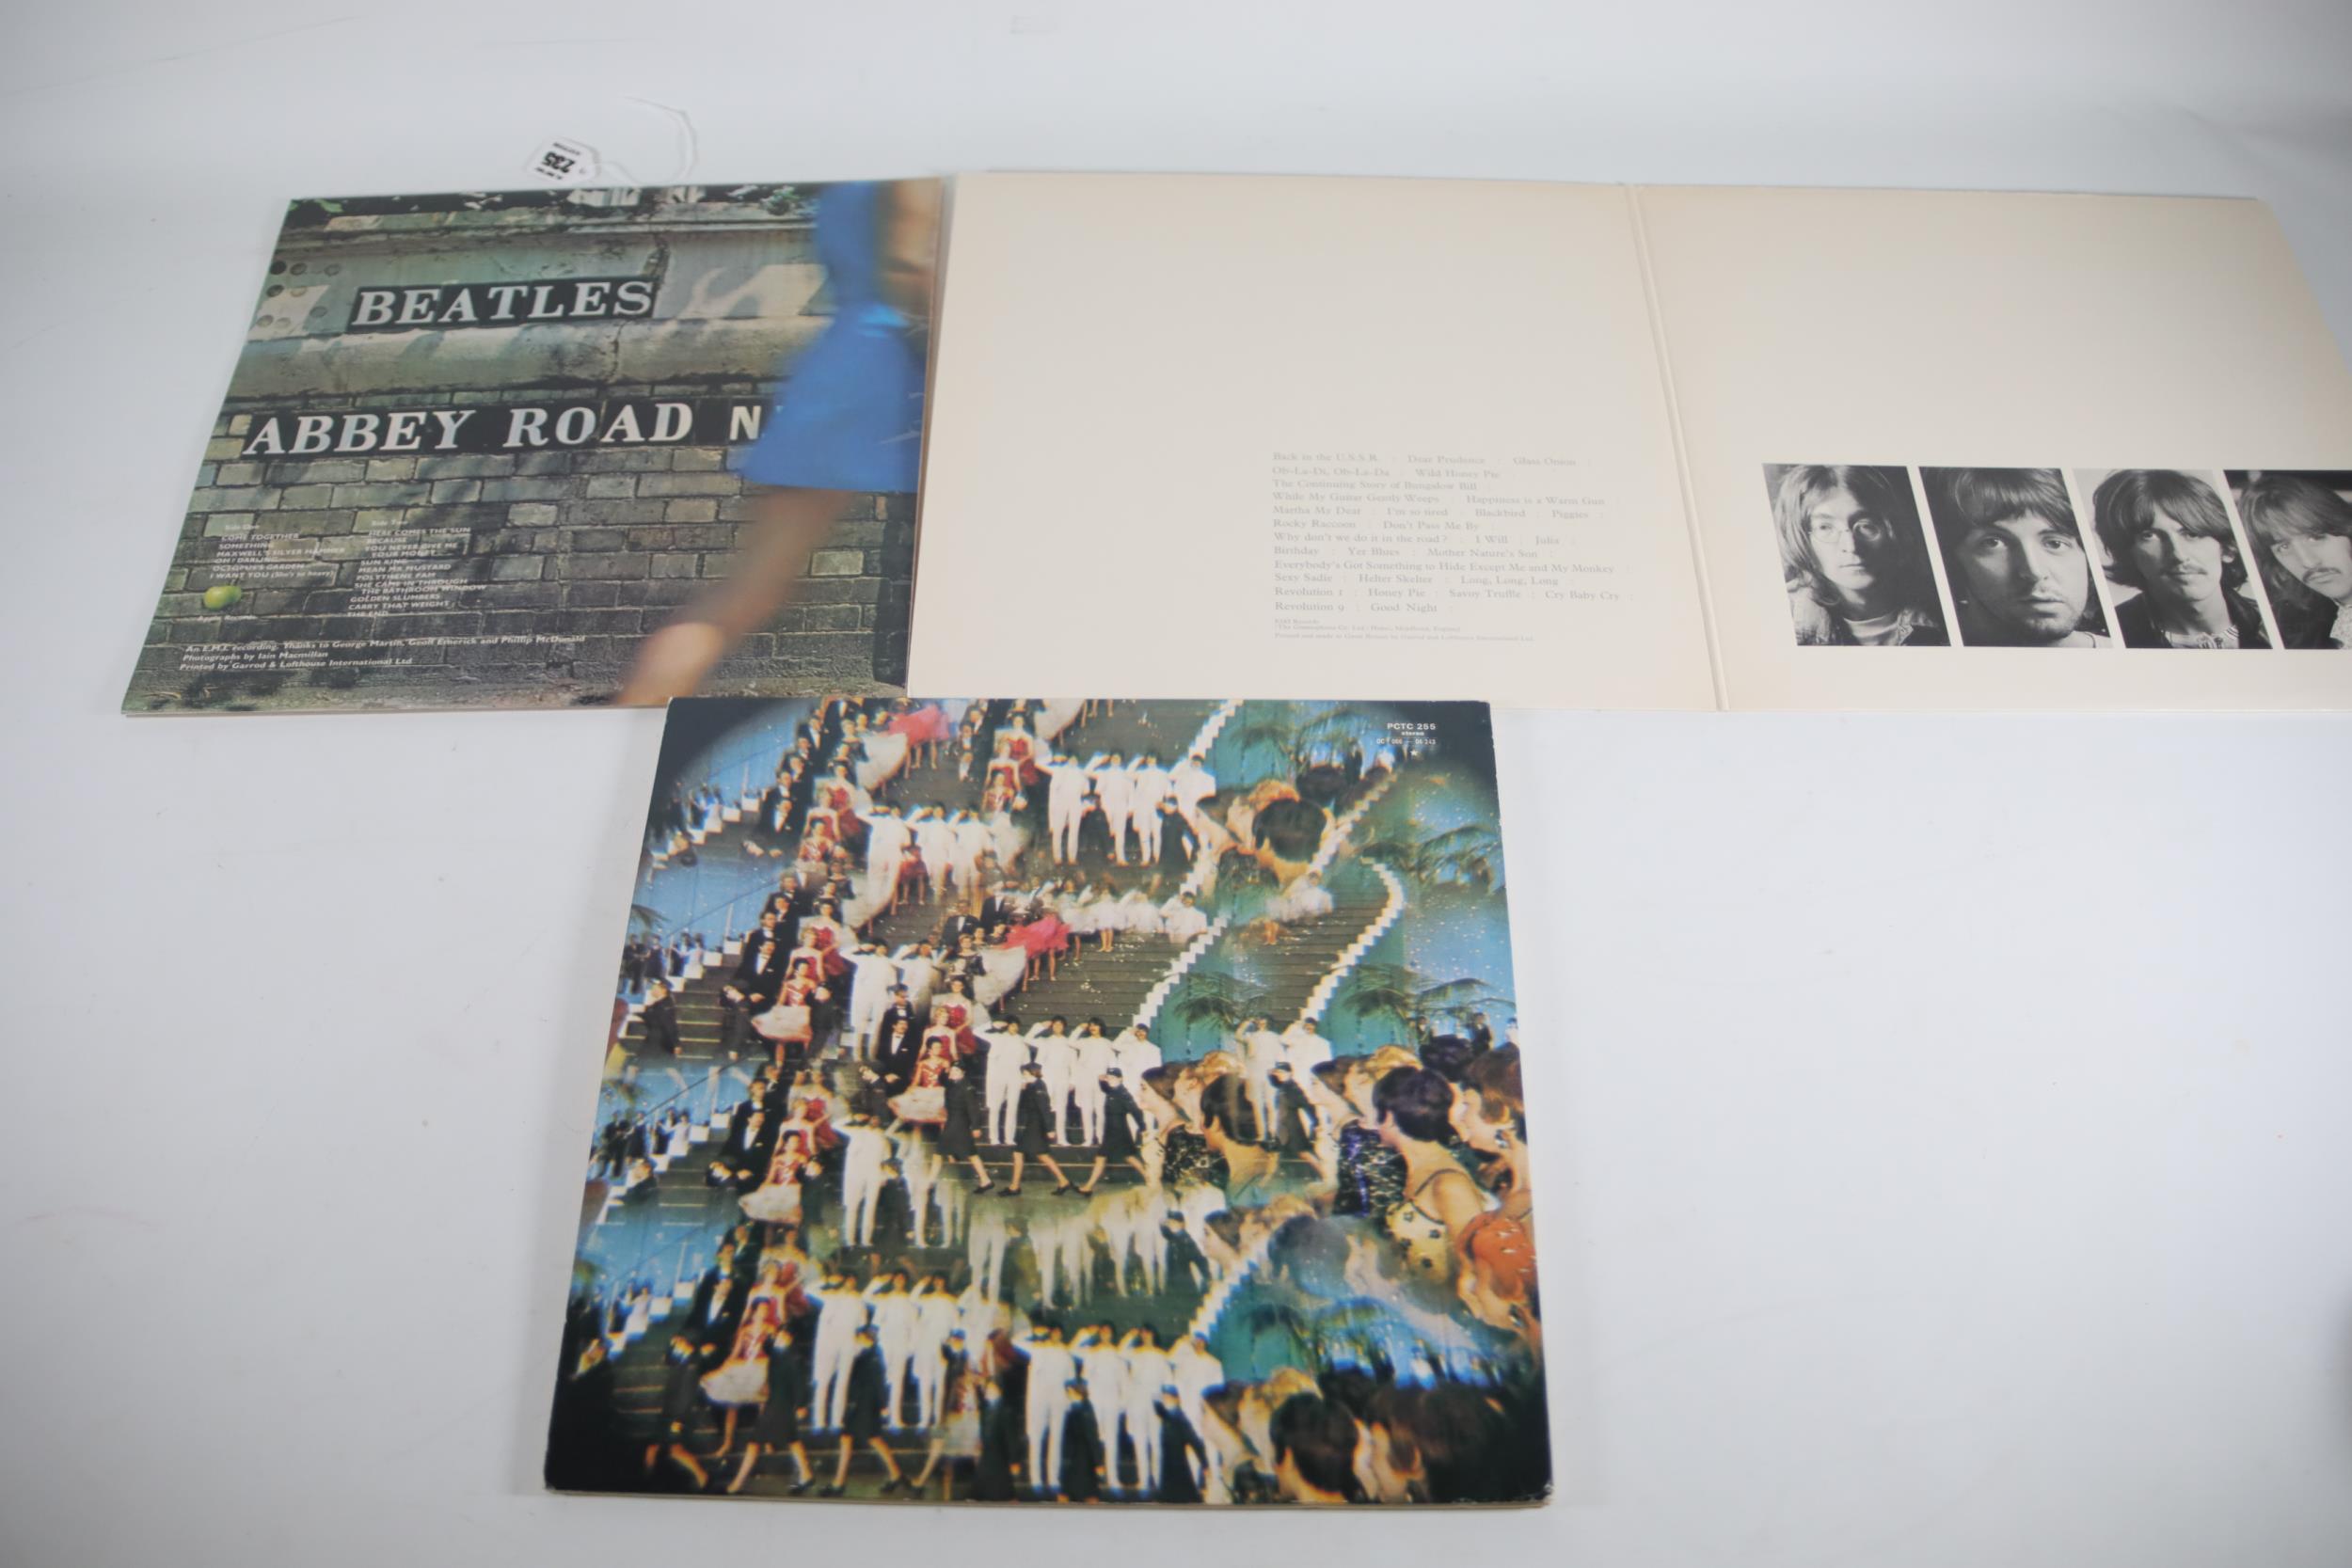 x4 The Beatles Vinyl LPs magical mystery tour sealed revolver album ect - Image 8 of 8